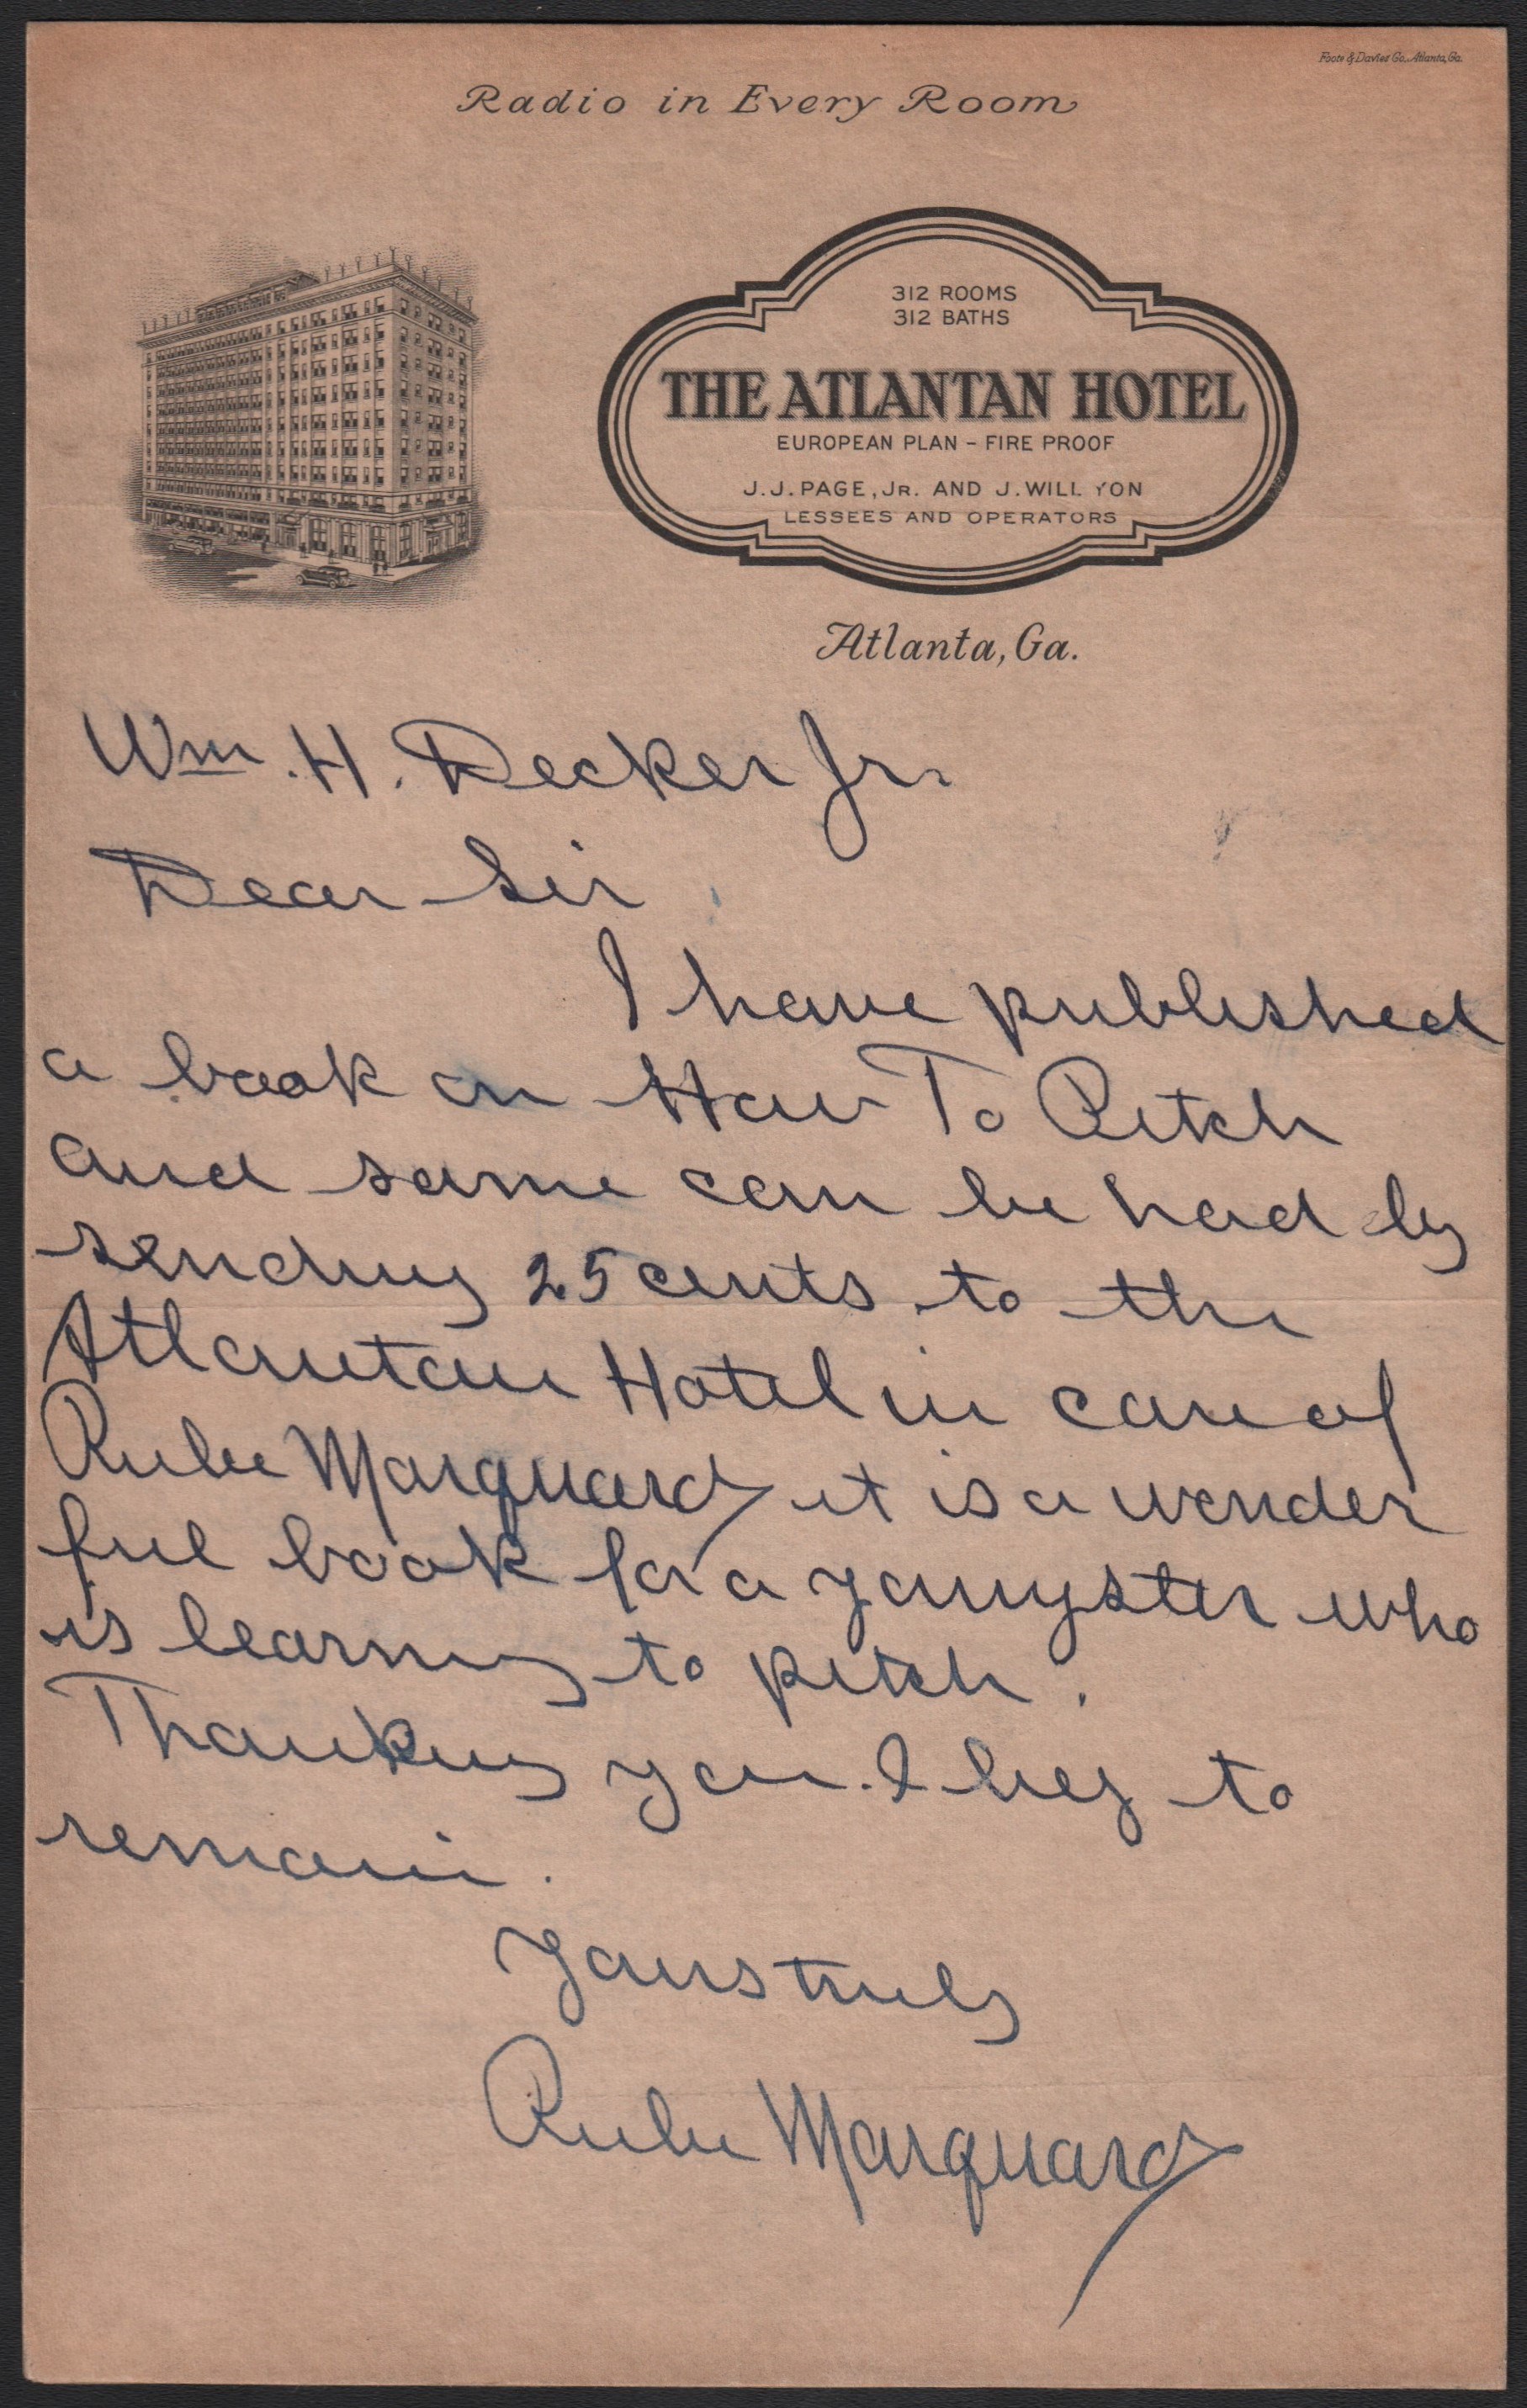 Baseball Autographs - 1932 Rube Marquard Letter "Selling" His Book - With Book Included!